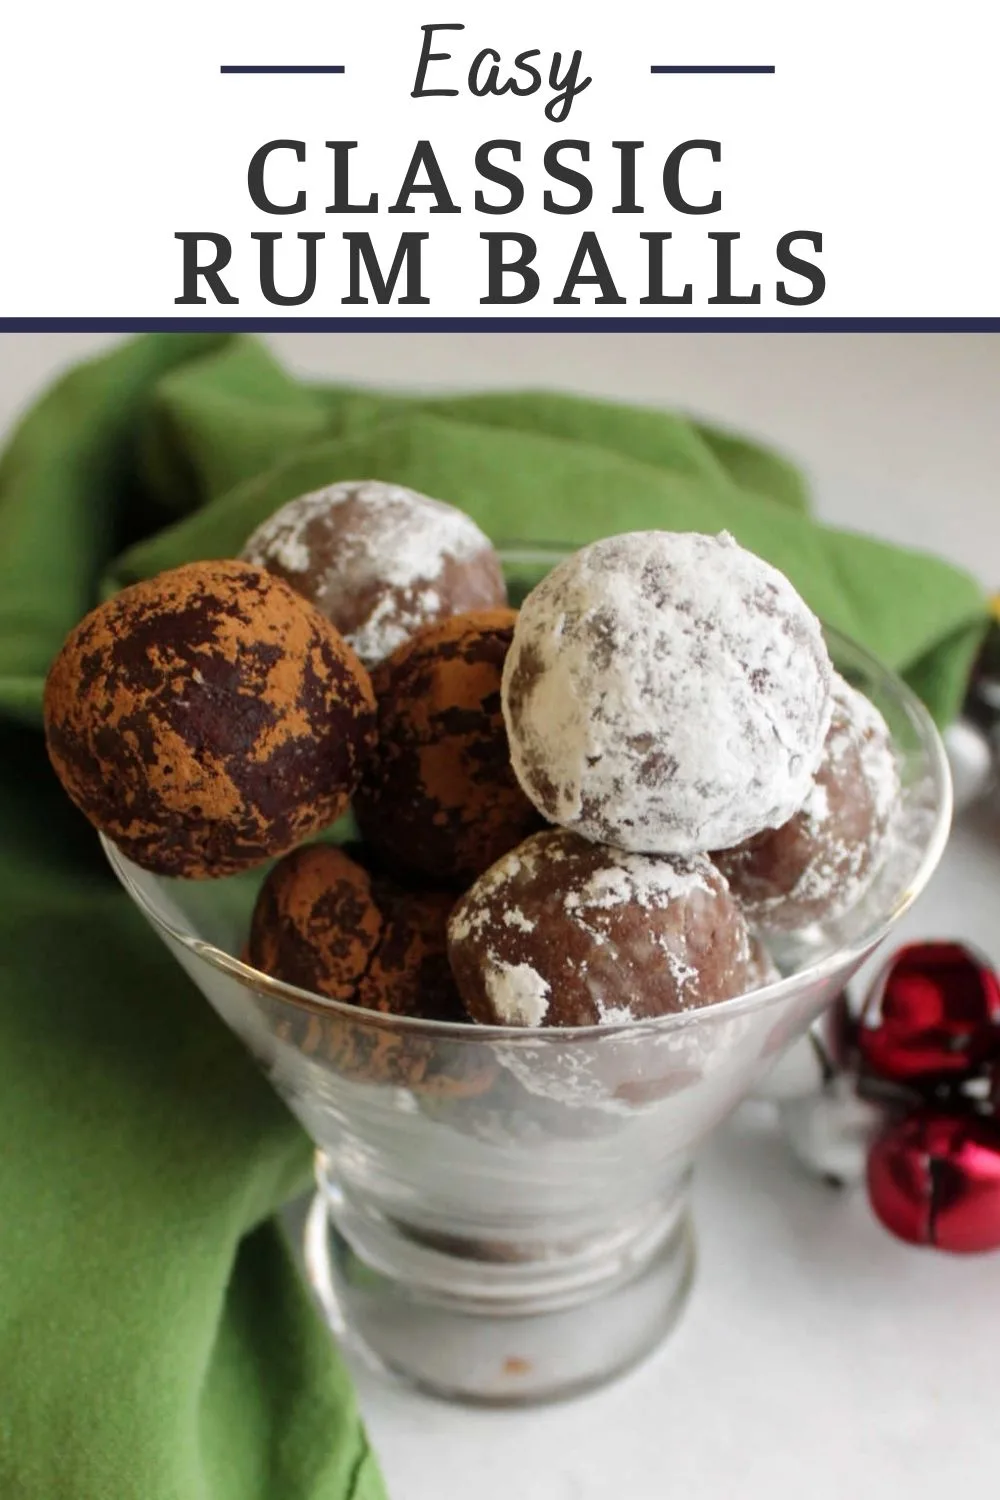 A flavorful adult treat perfect for the holidays, these no-bake rum balls are quick to make and even better when made ahead. They'll warm you from the inside out!